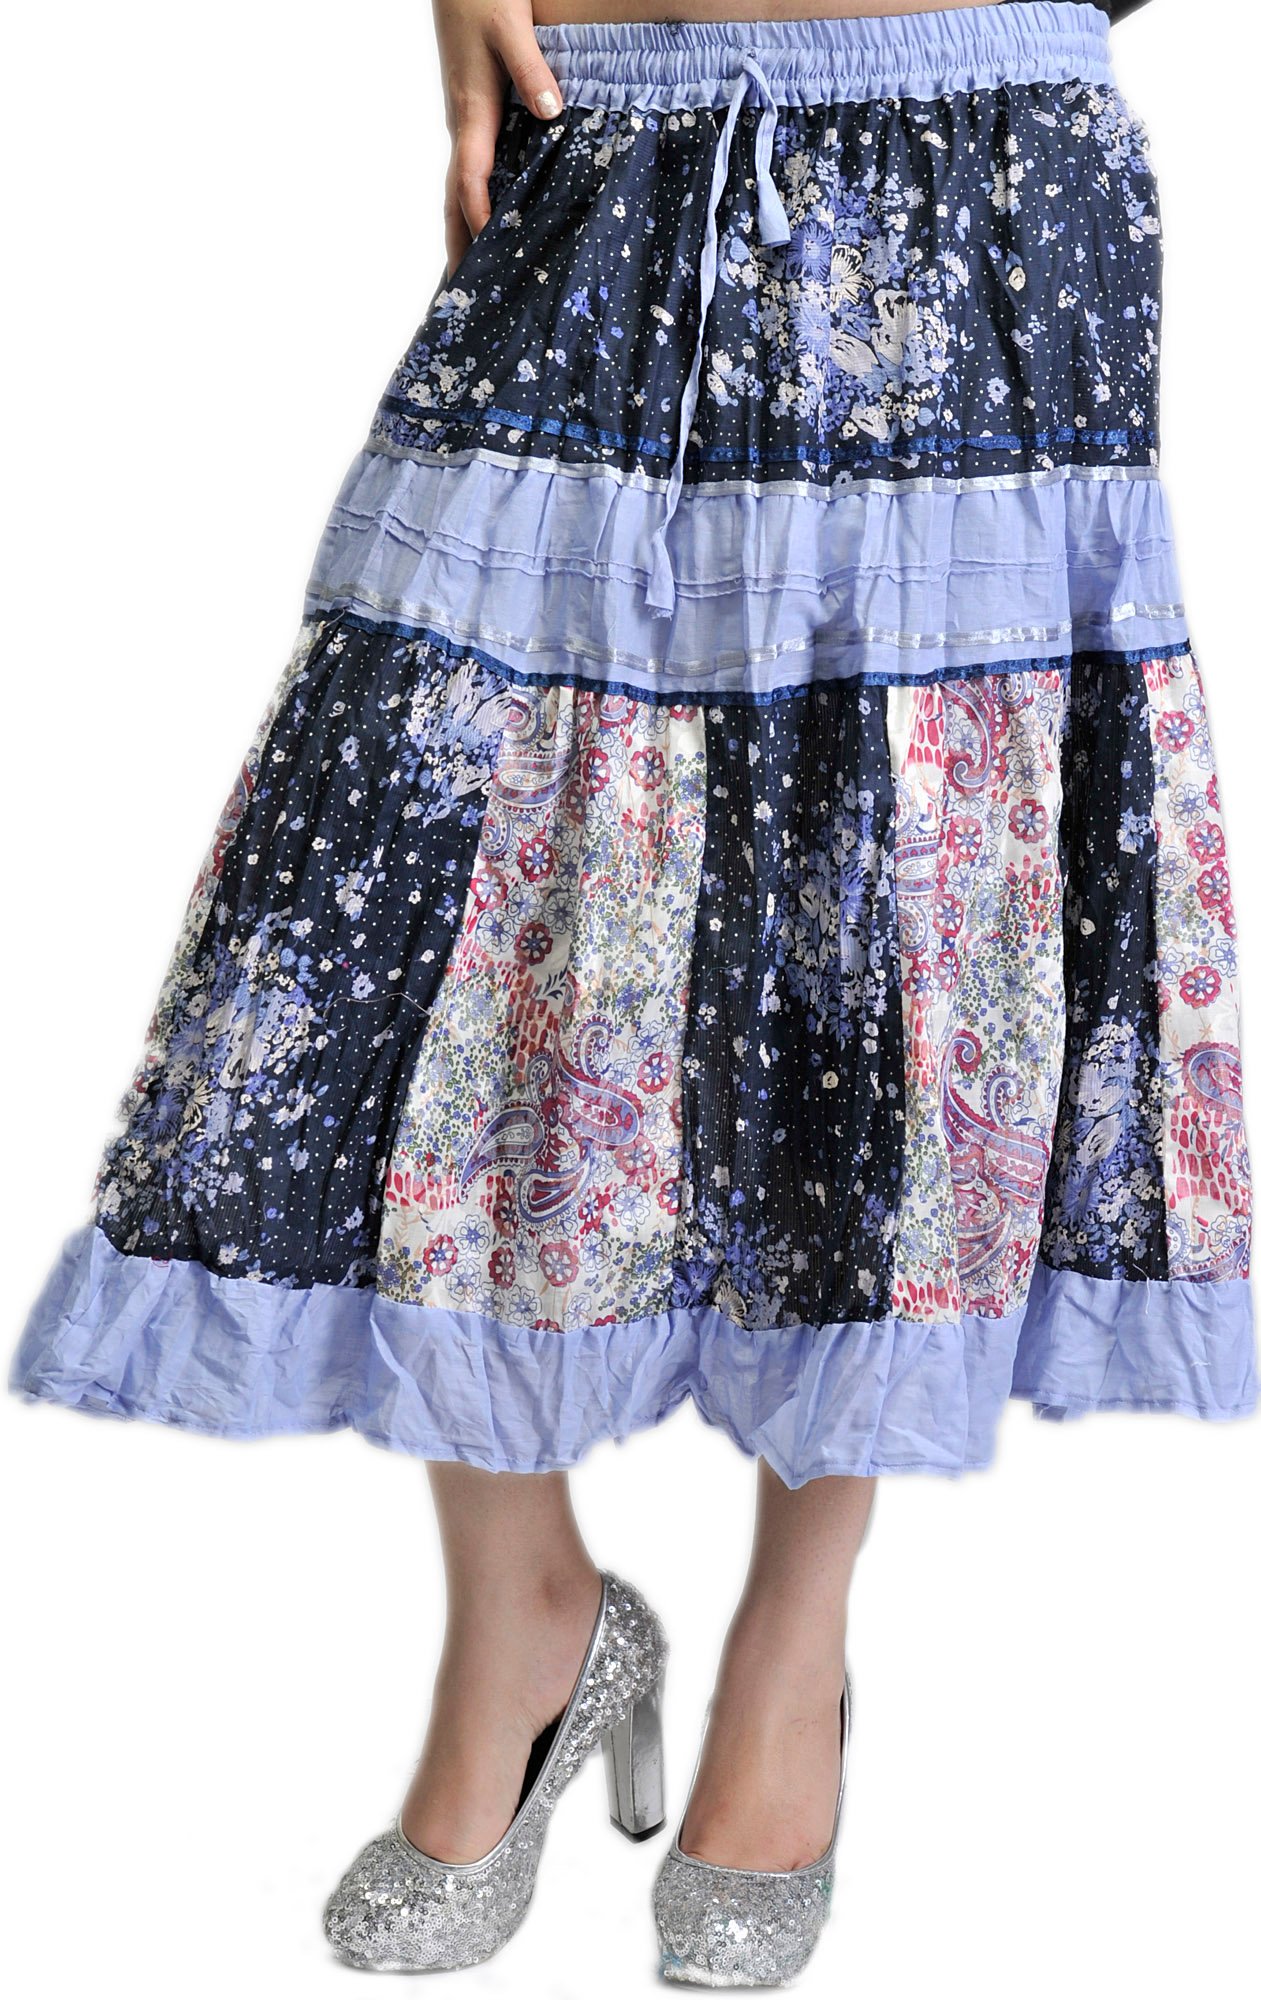 Steel-Blue and Black Midi-Skirt with Printed Paisleys and Patchwork ...